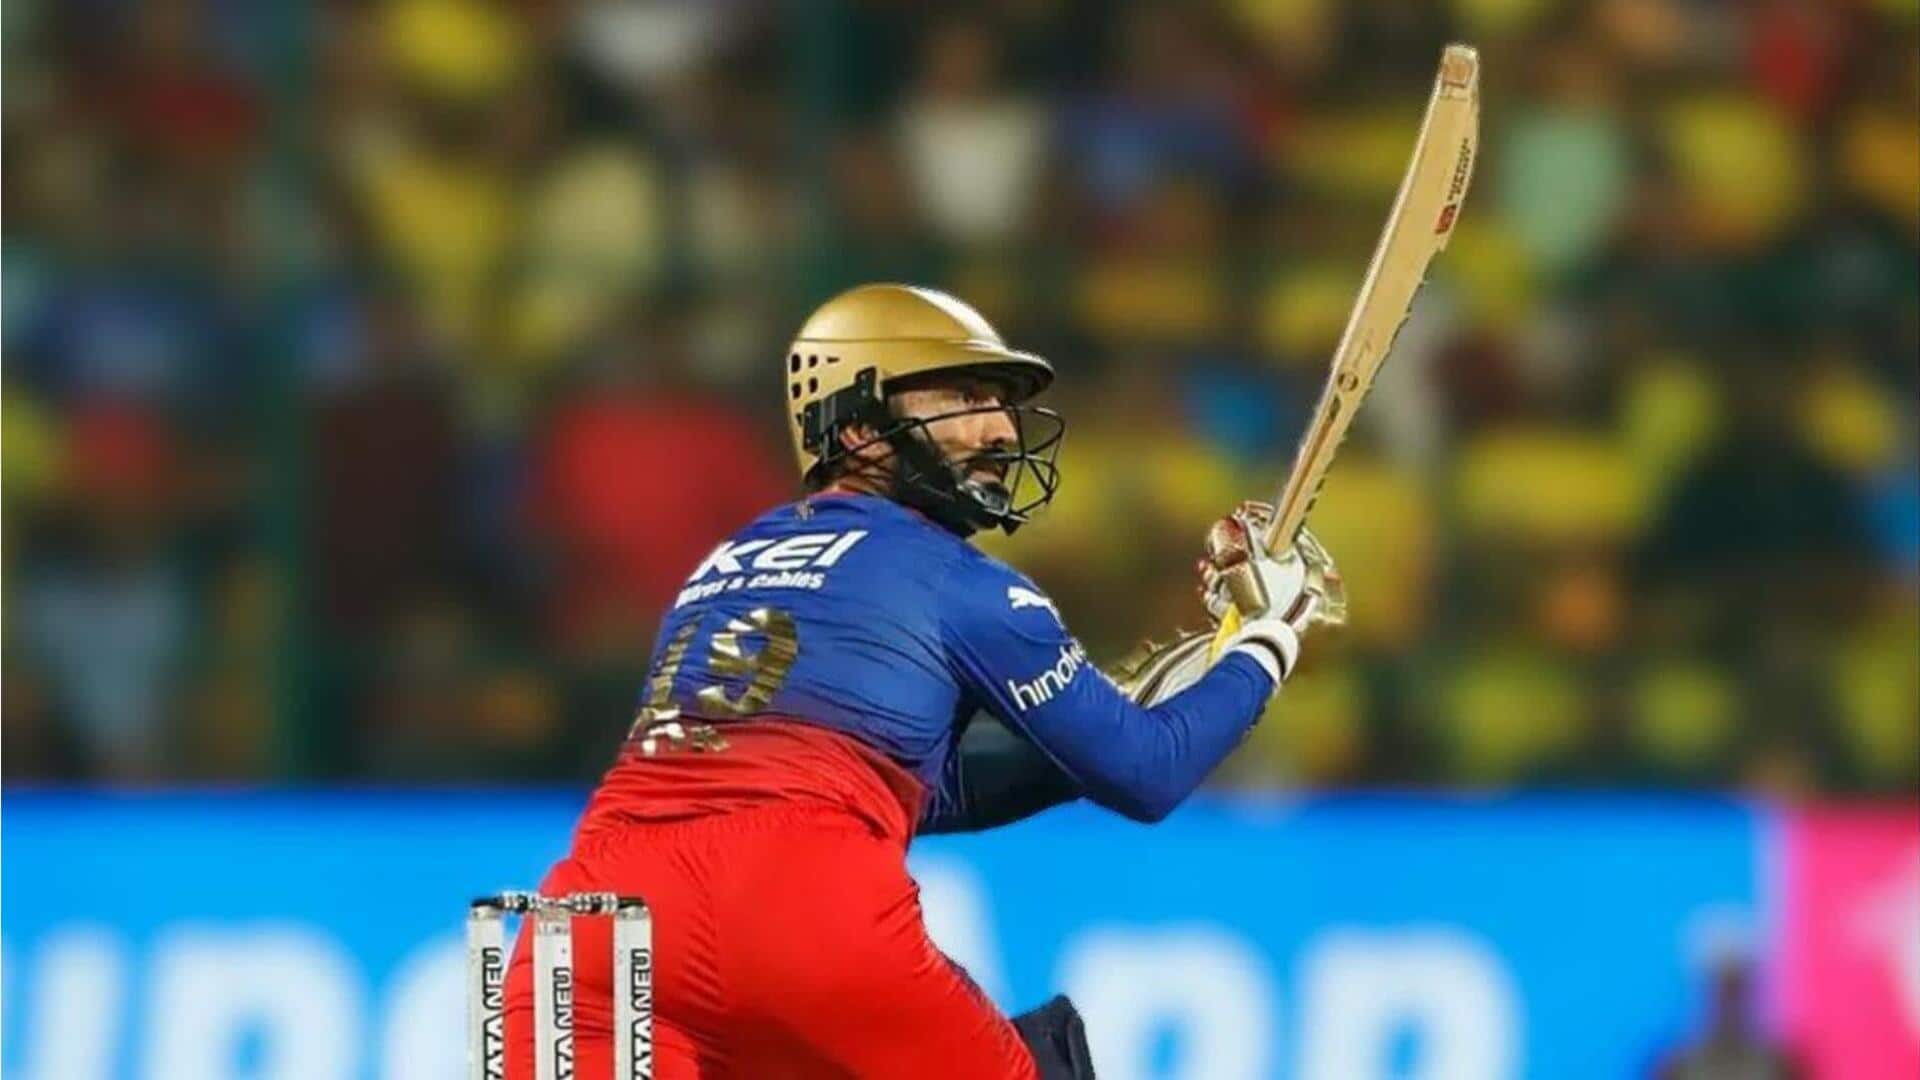 RCB appoint Dinesh Karthik as batting coach: Decoding his stats